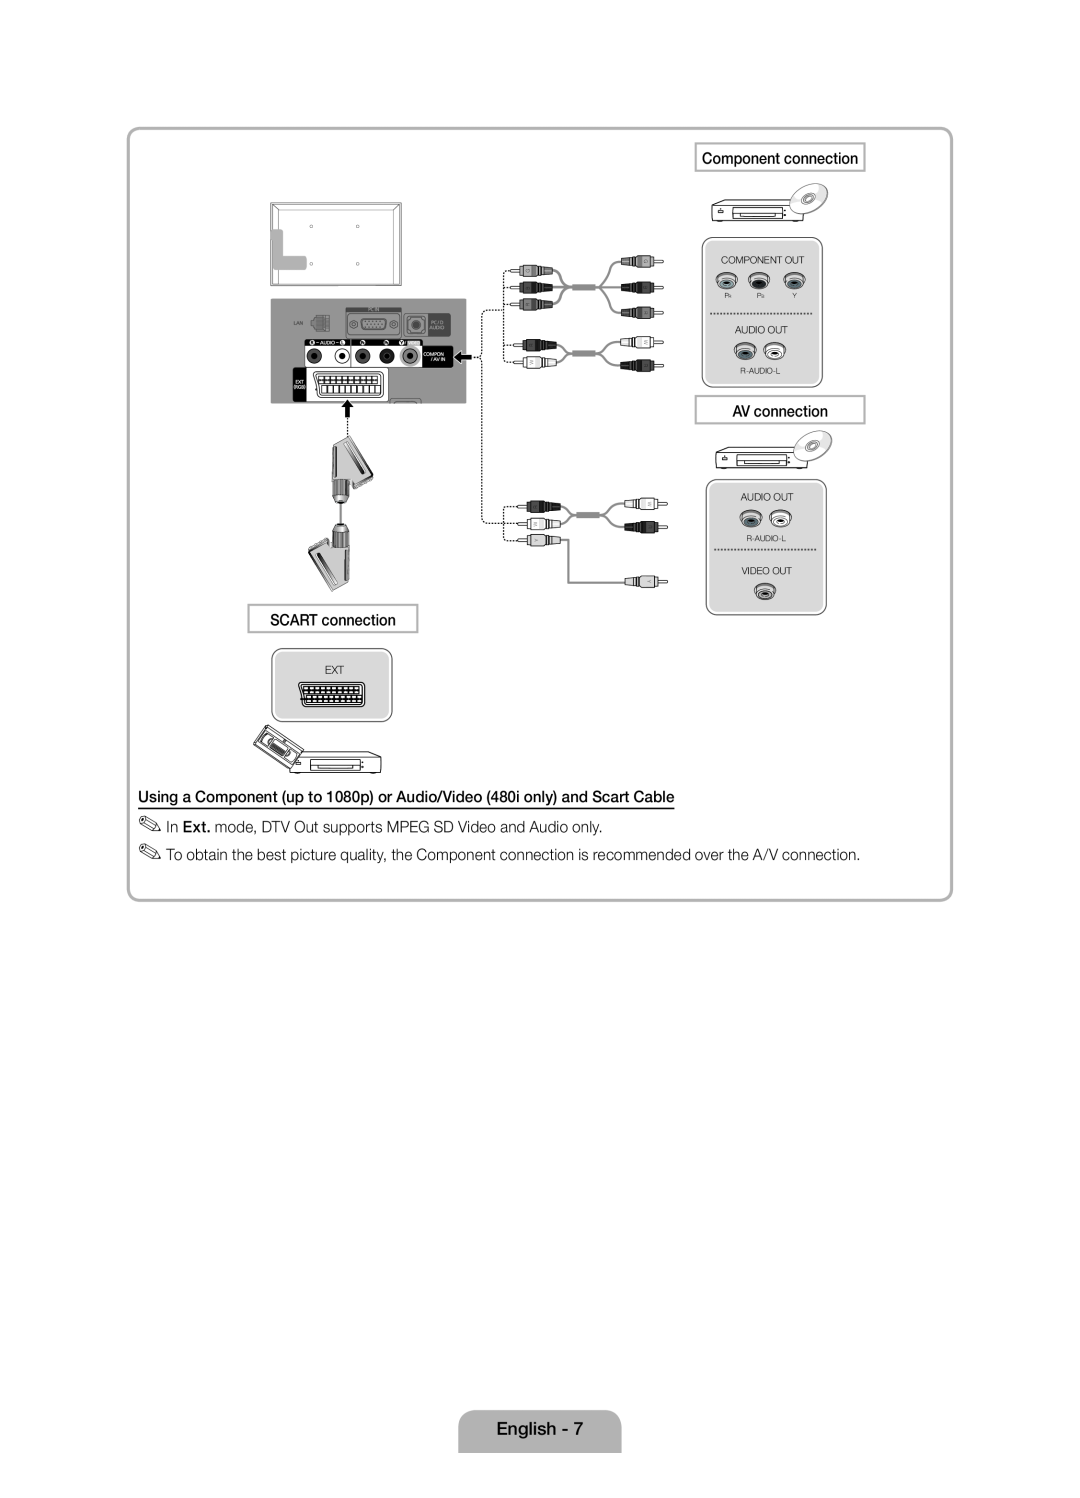 Samsung Series 5 user manual Component Out, Audio Out, Video Out, R-Audio-L 